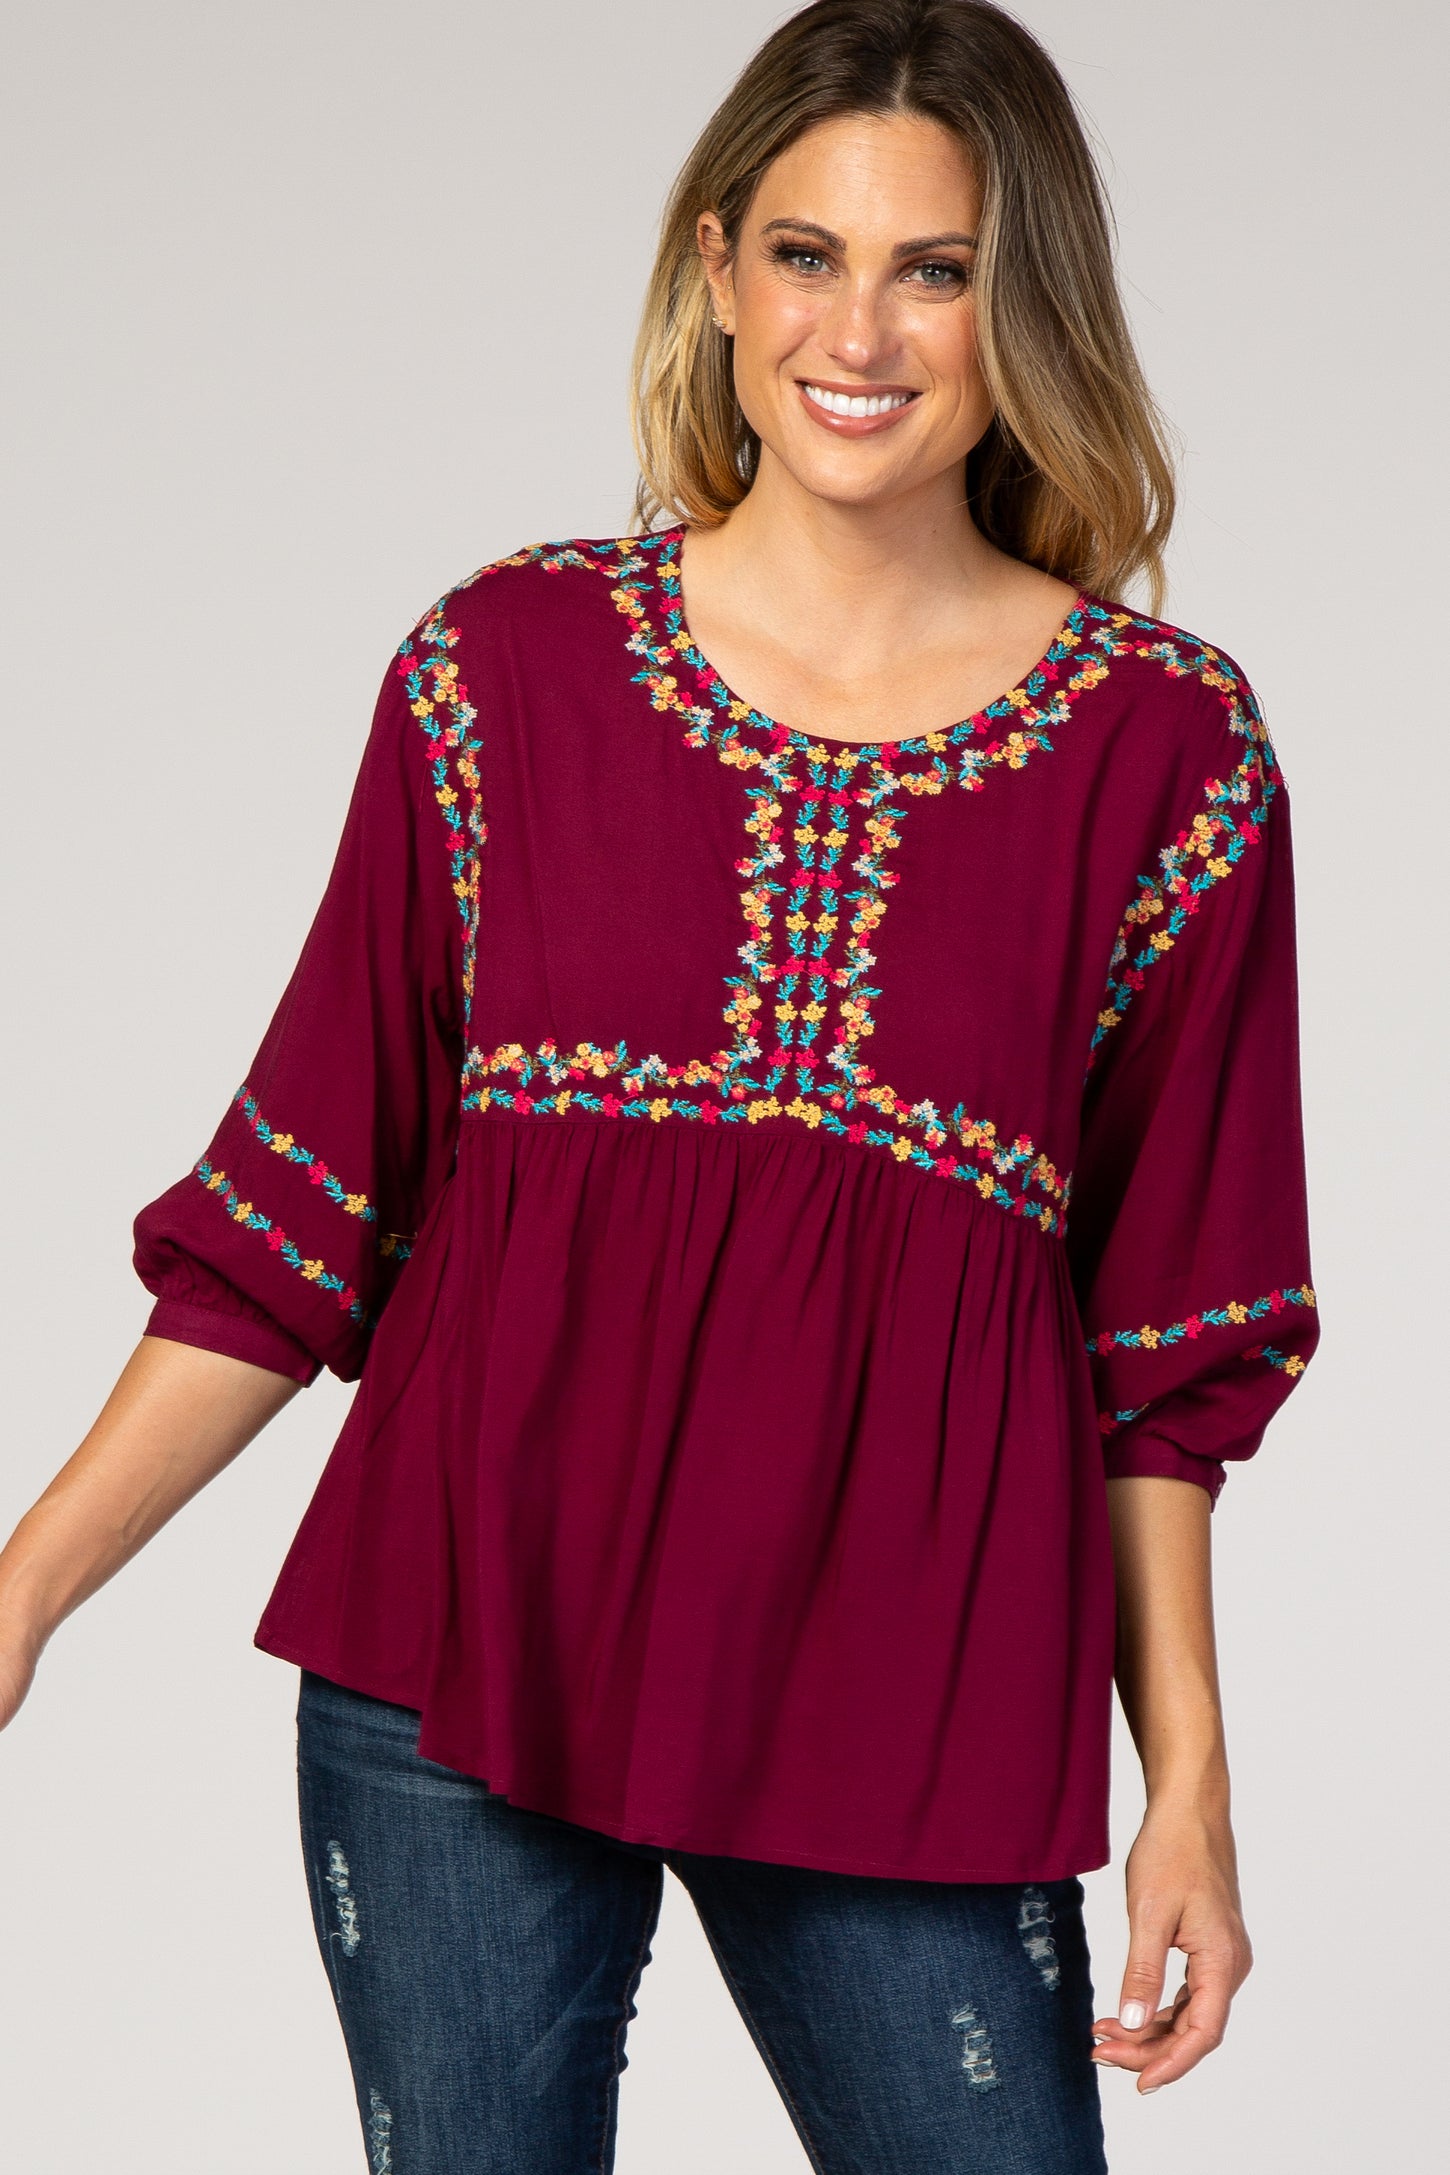 Burgundy Floral Embroidery 3/4 Puff Sleeve Maternity Blouse